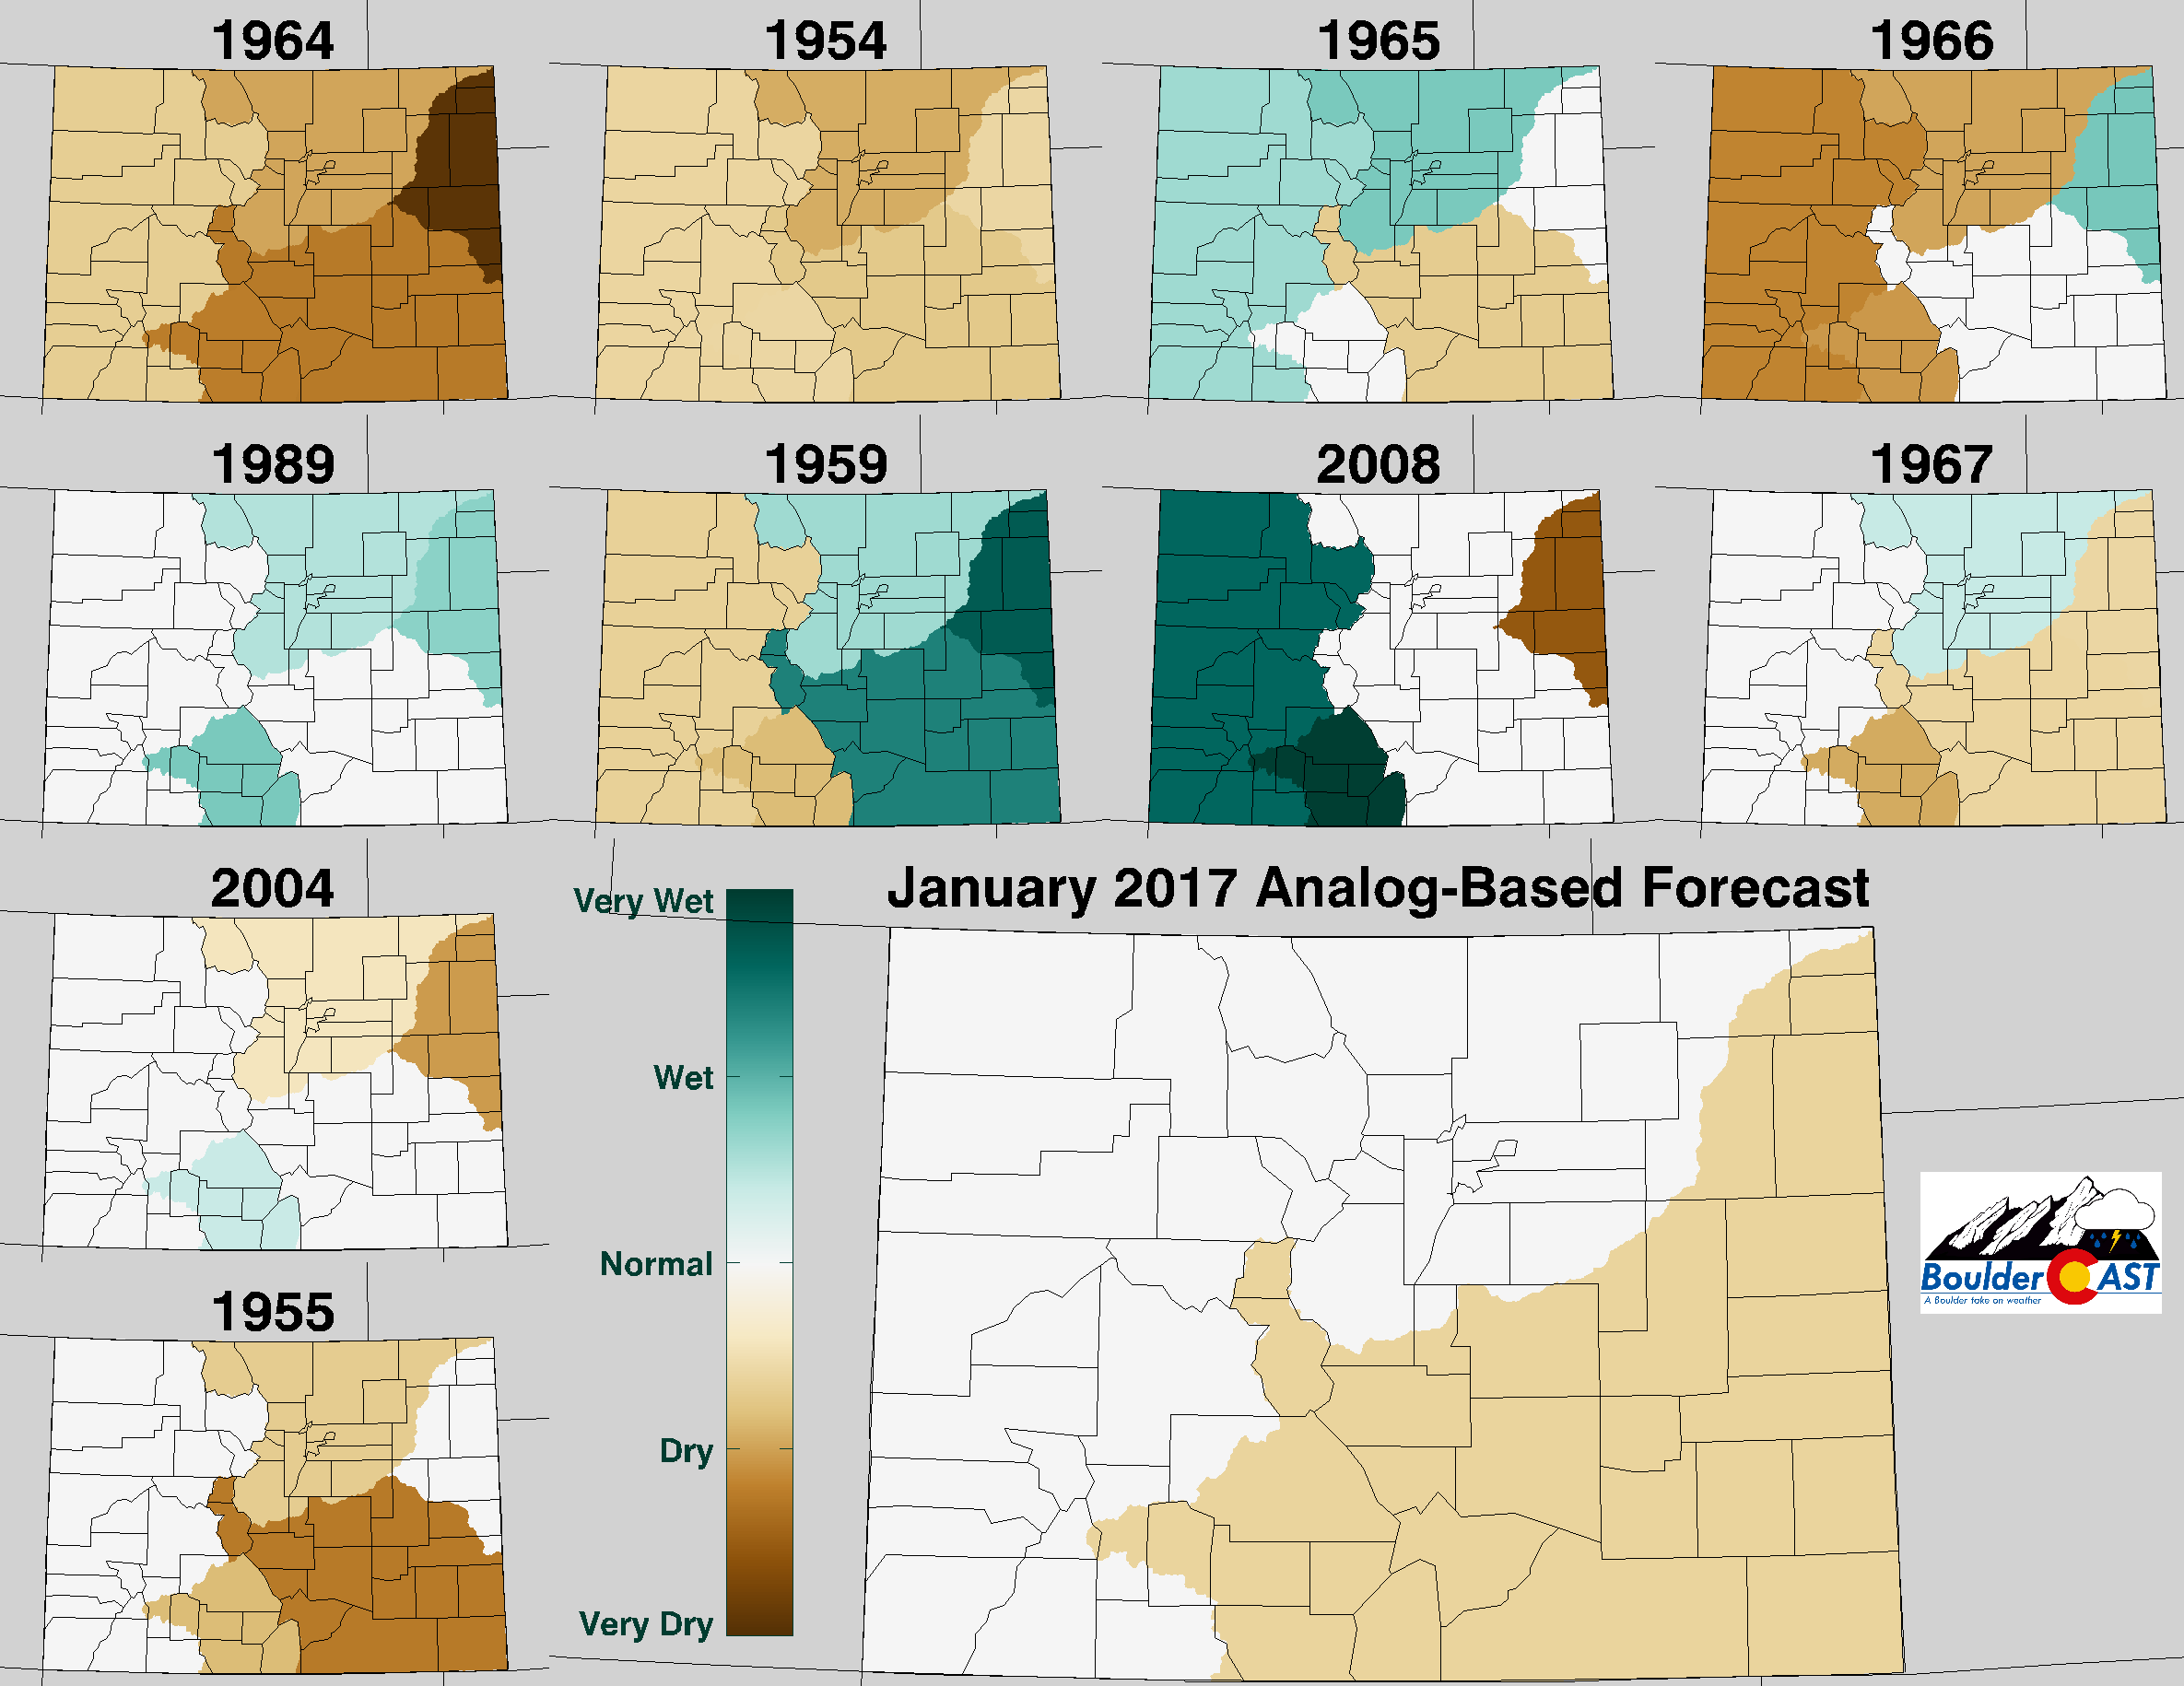 Top 10 Analogs to 2016 and how those years played for PRECIPITATION in Colorado during the month of January. The large map shows the analog-based weighted consensus forecast based on those 10 years.